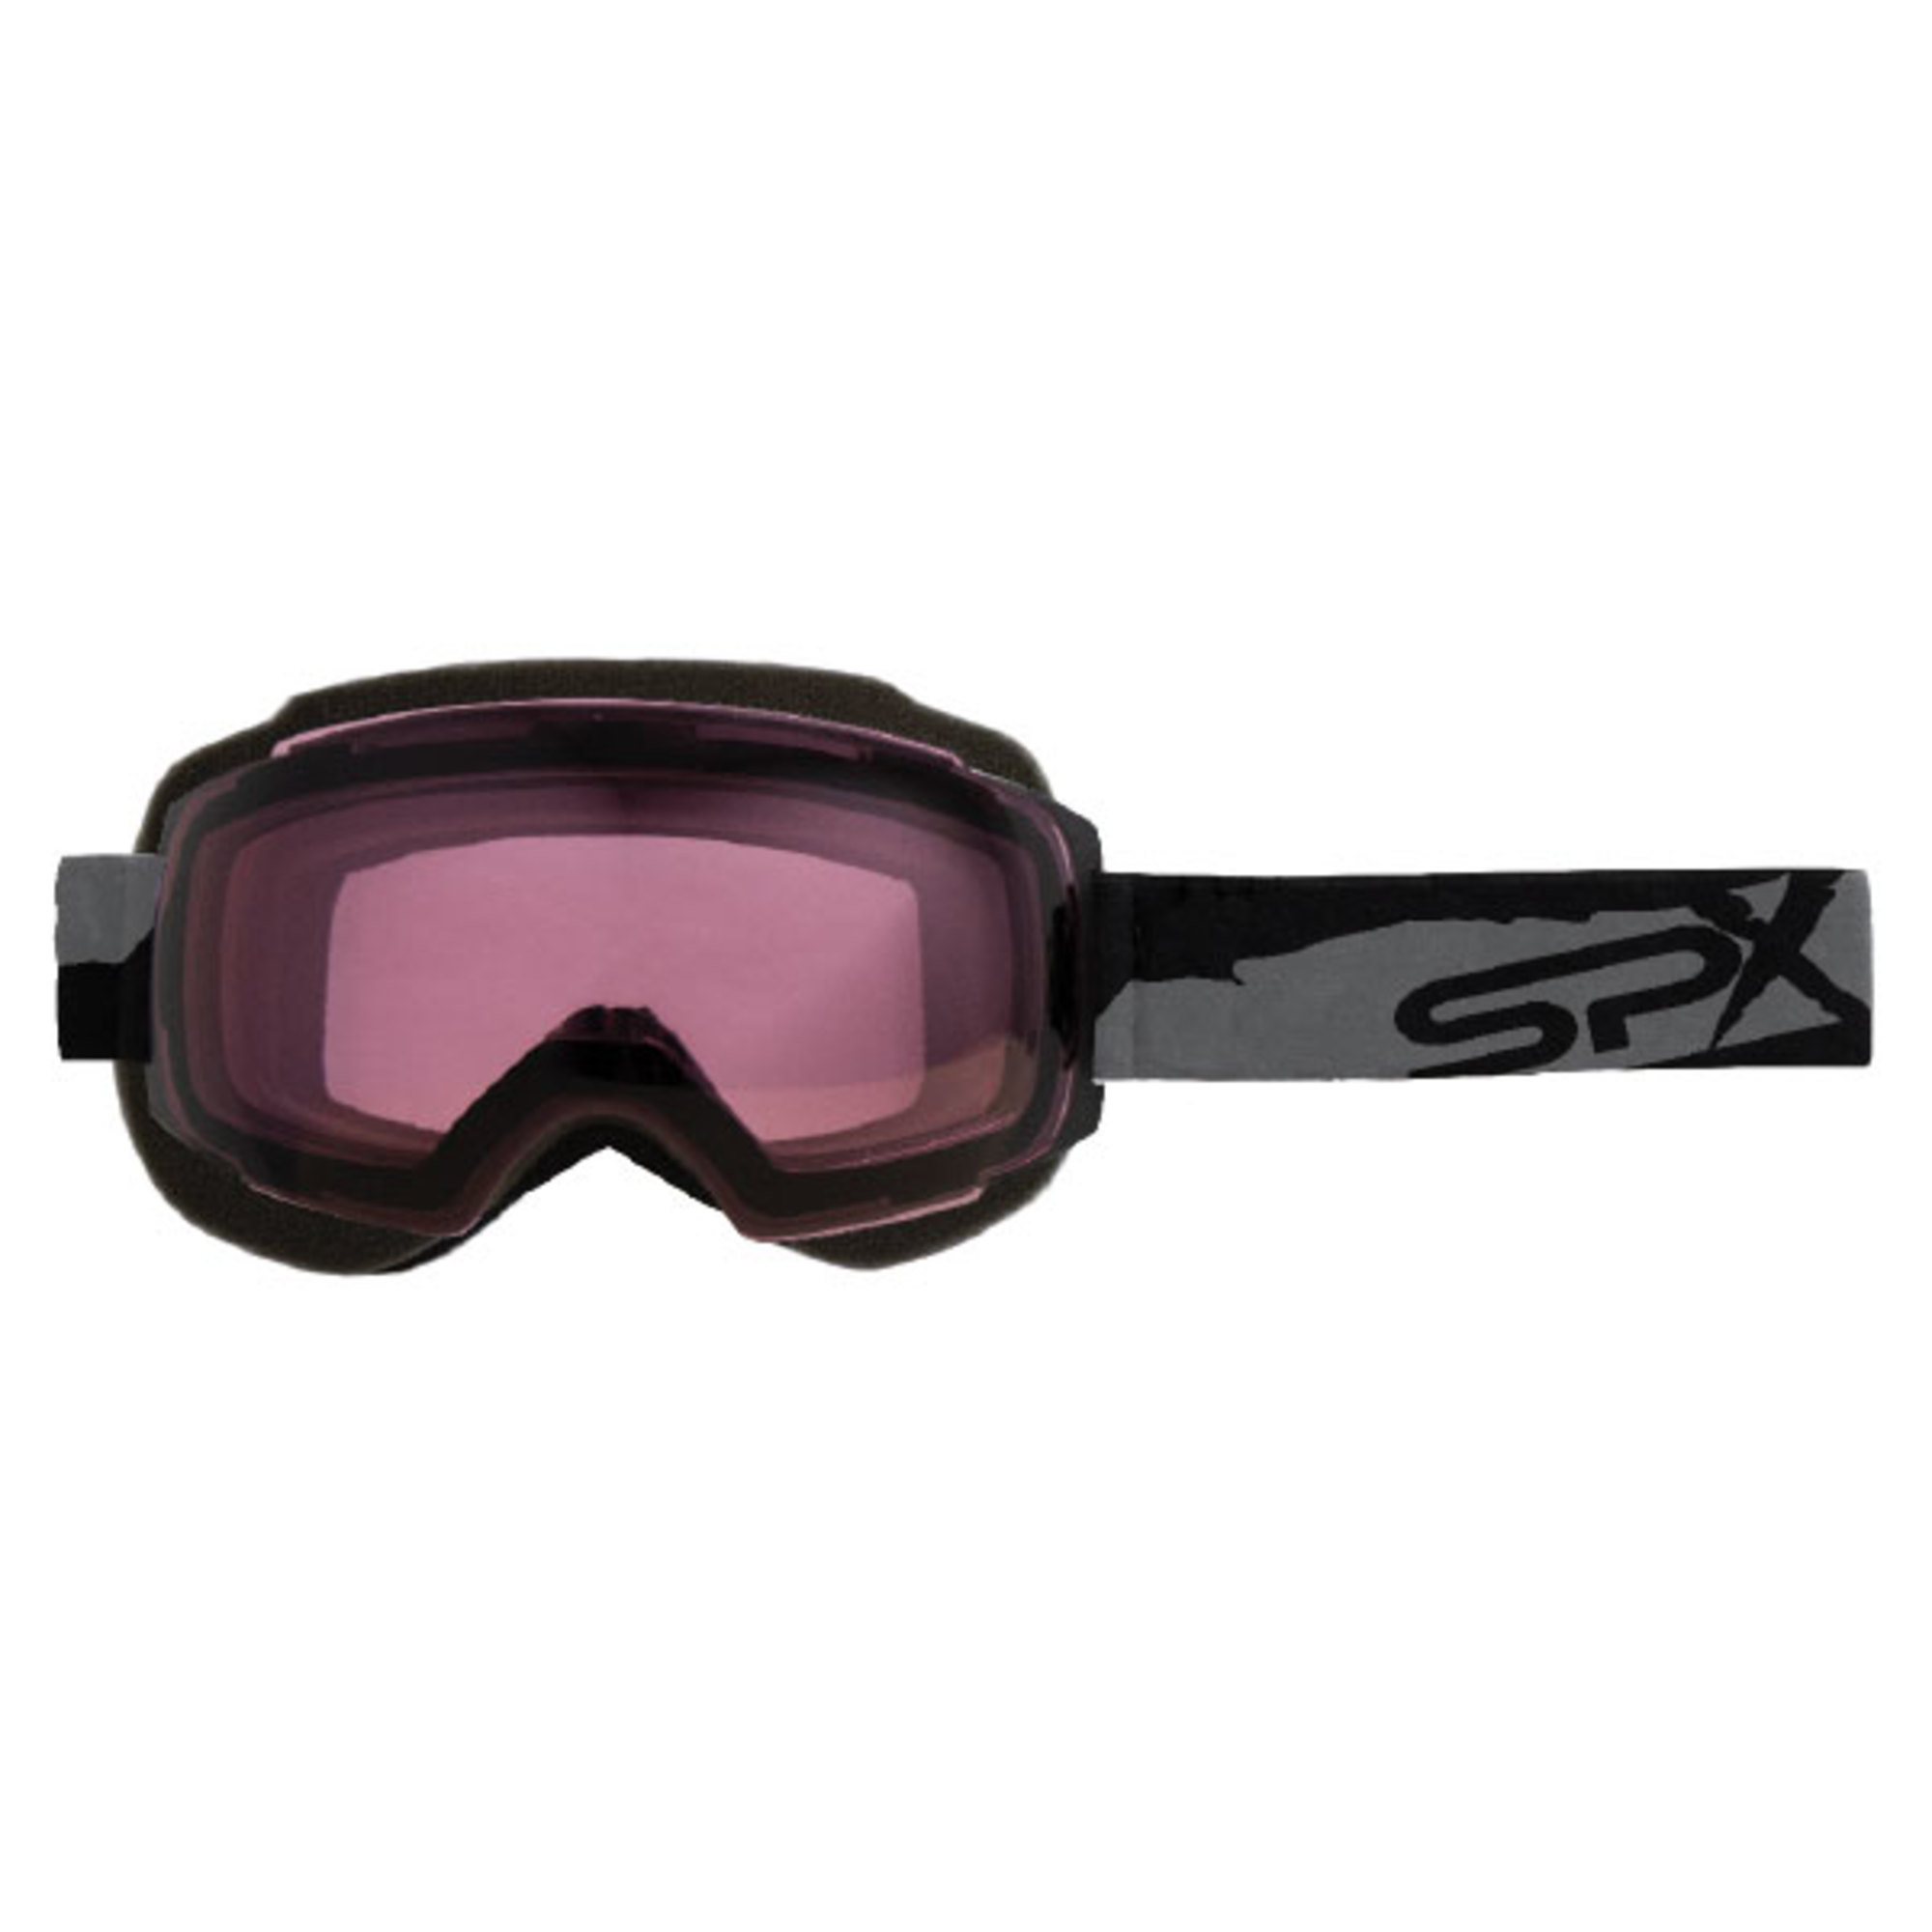 spx goggles lens adult double